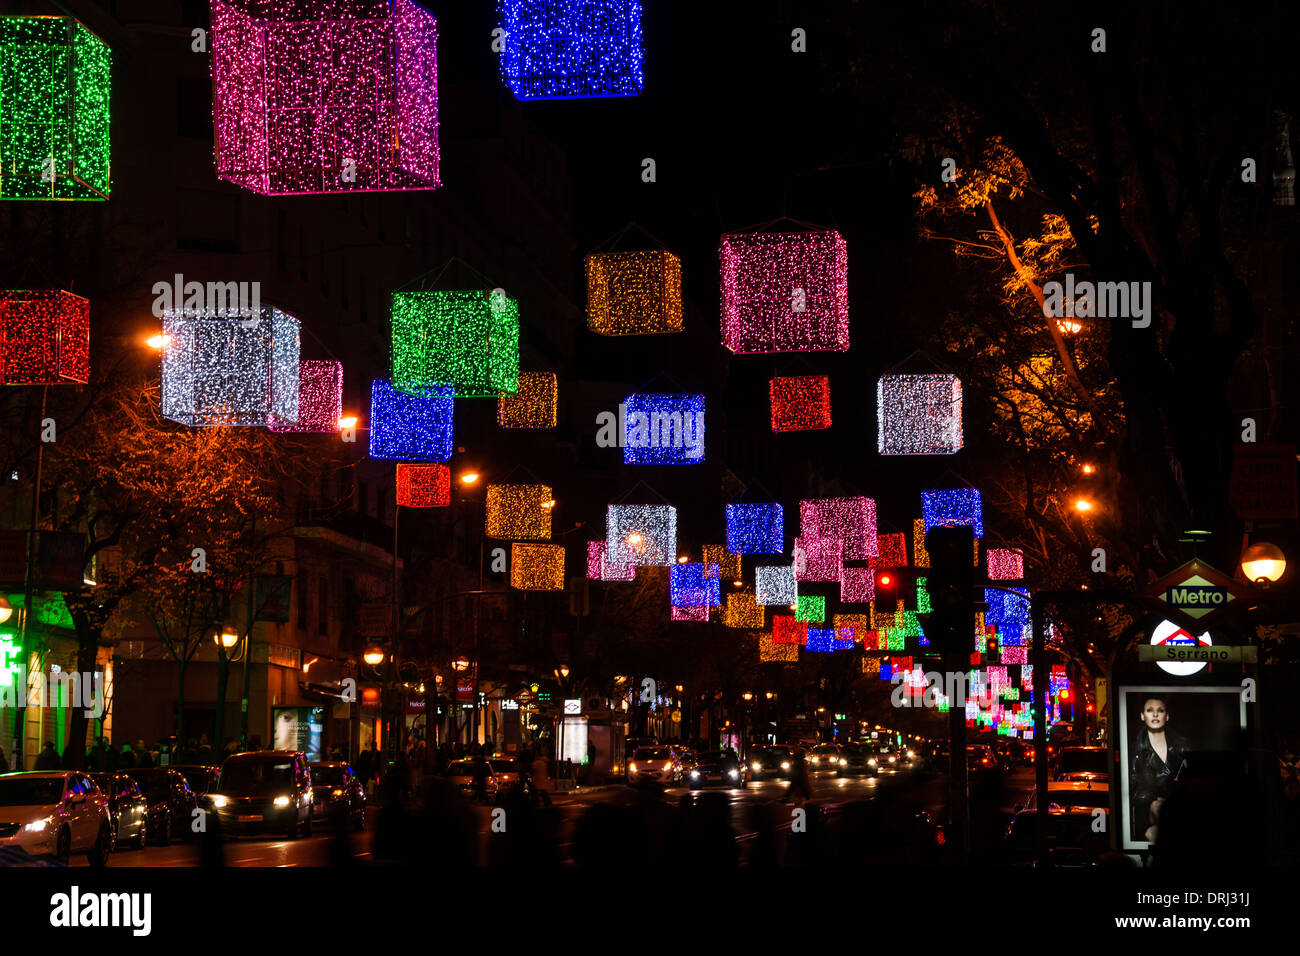 Calle de Goya street in Madrid with Christmas decorations Stock Photo